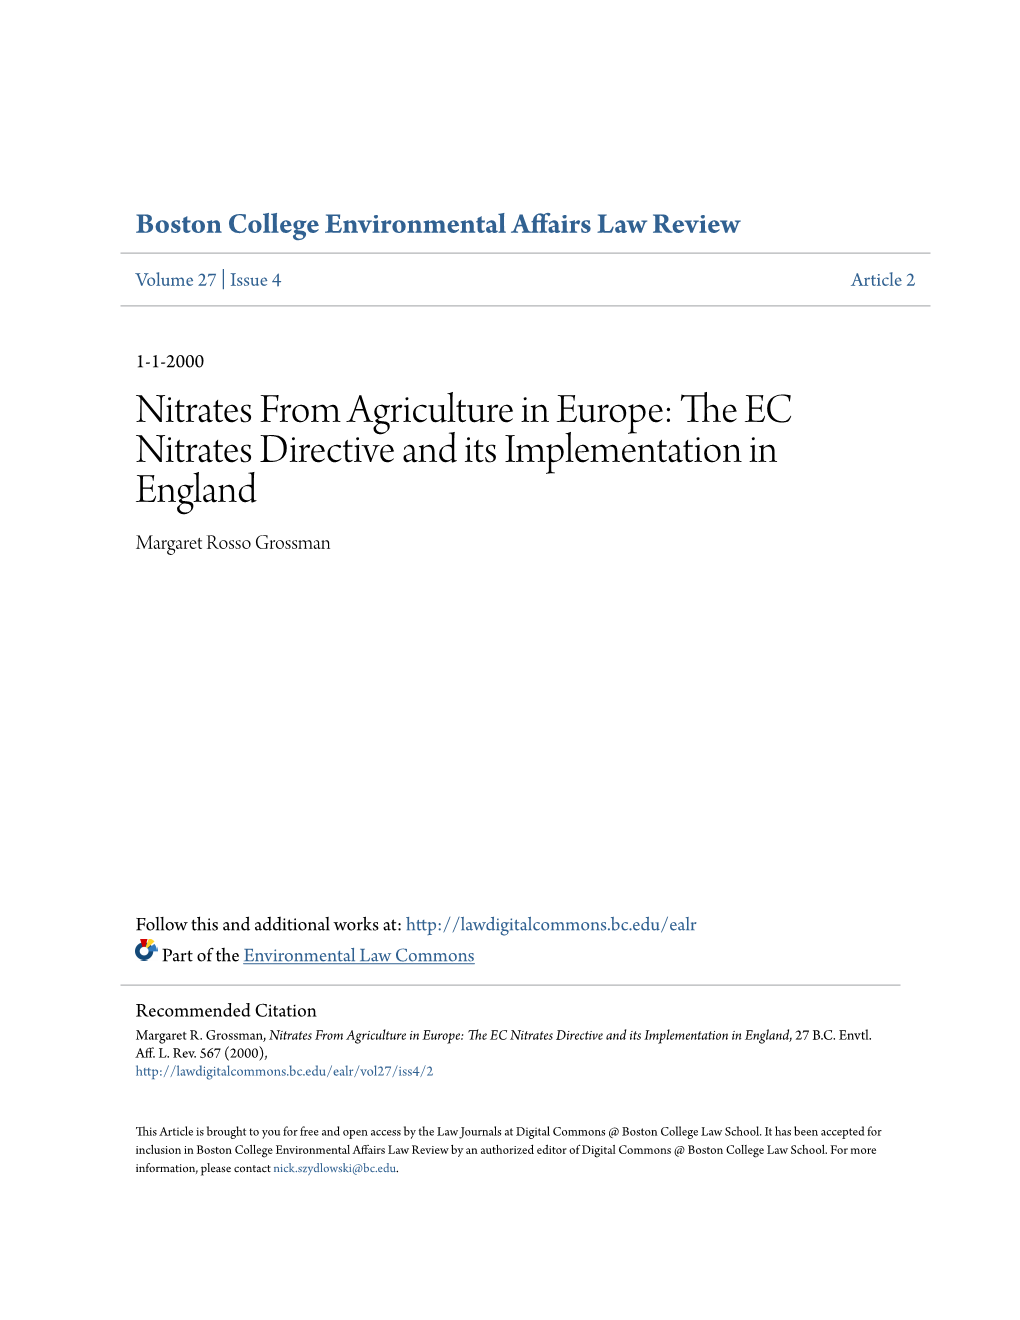 The EC Nitrates Directive and Its Implementation in England, 27 B.C